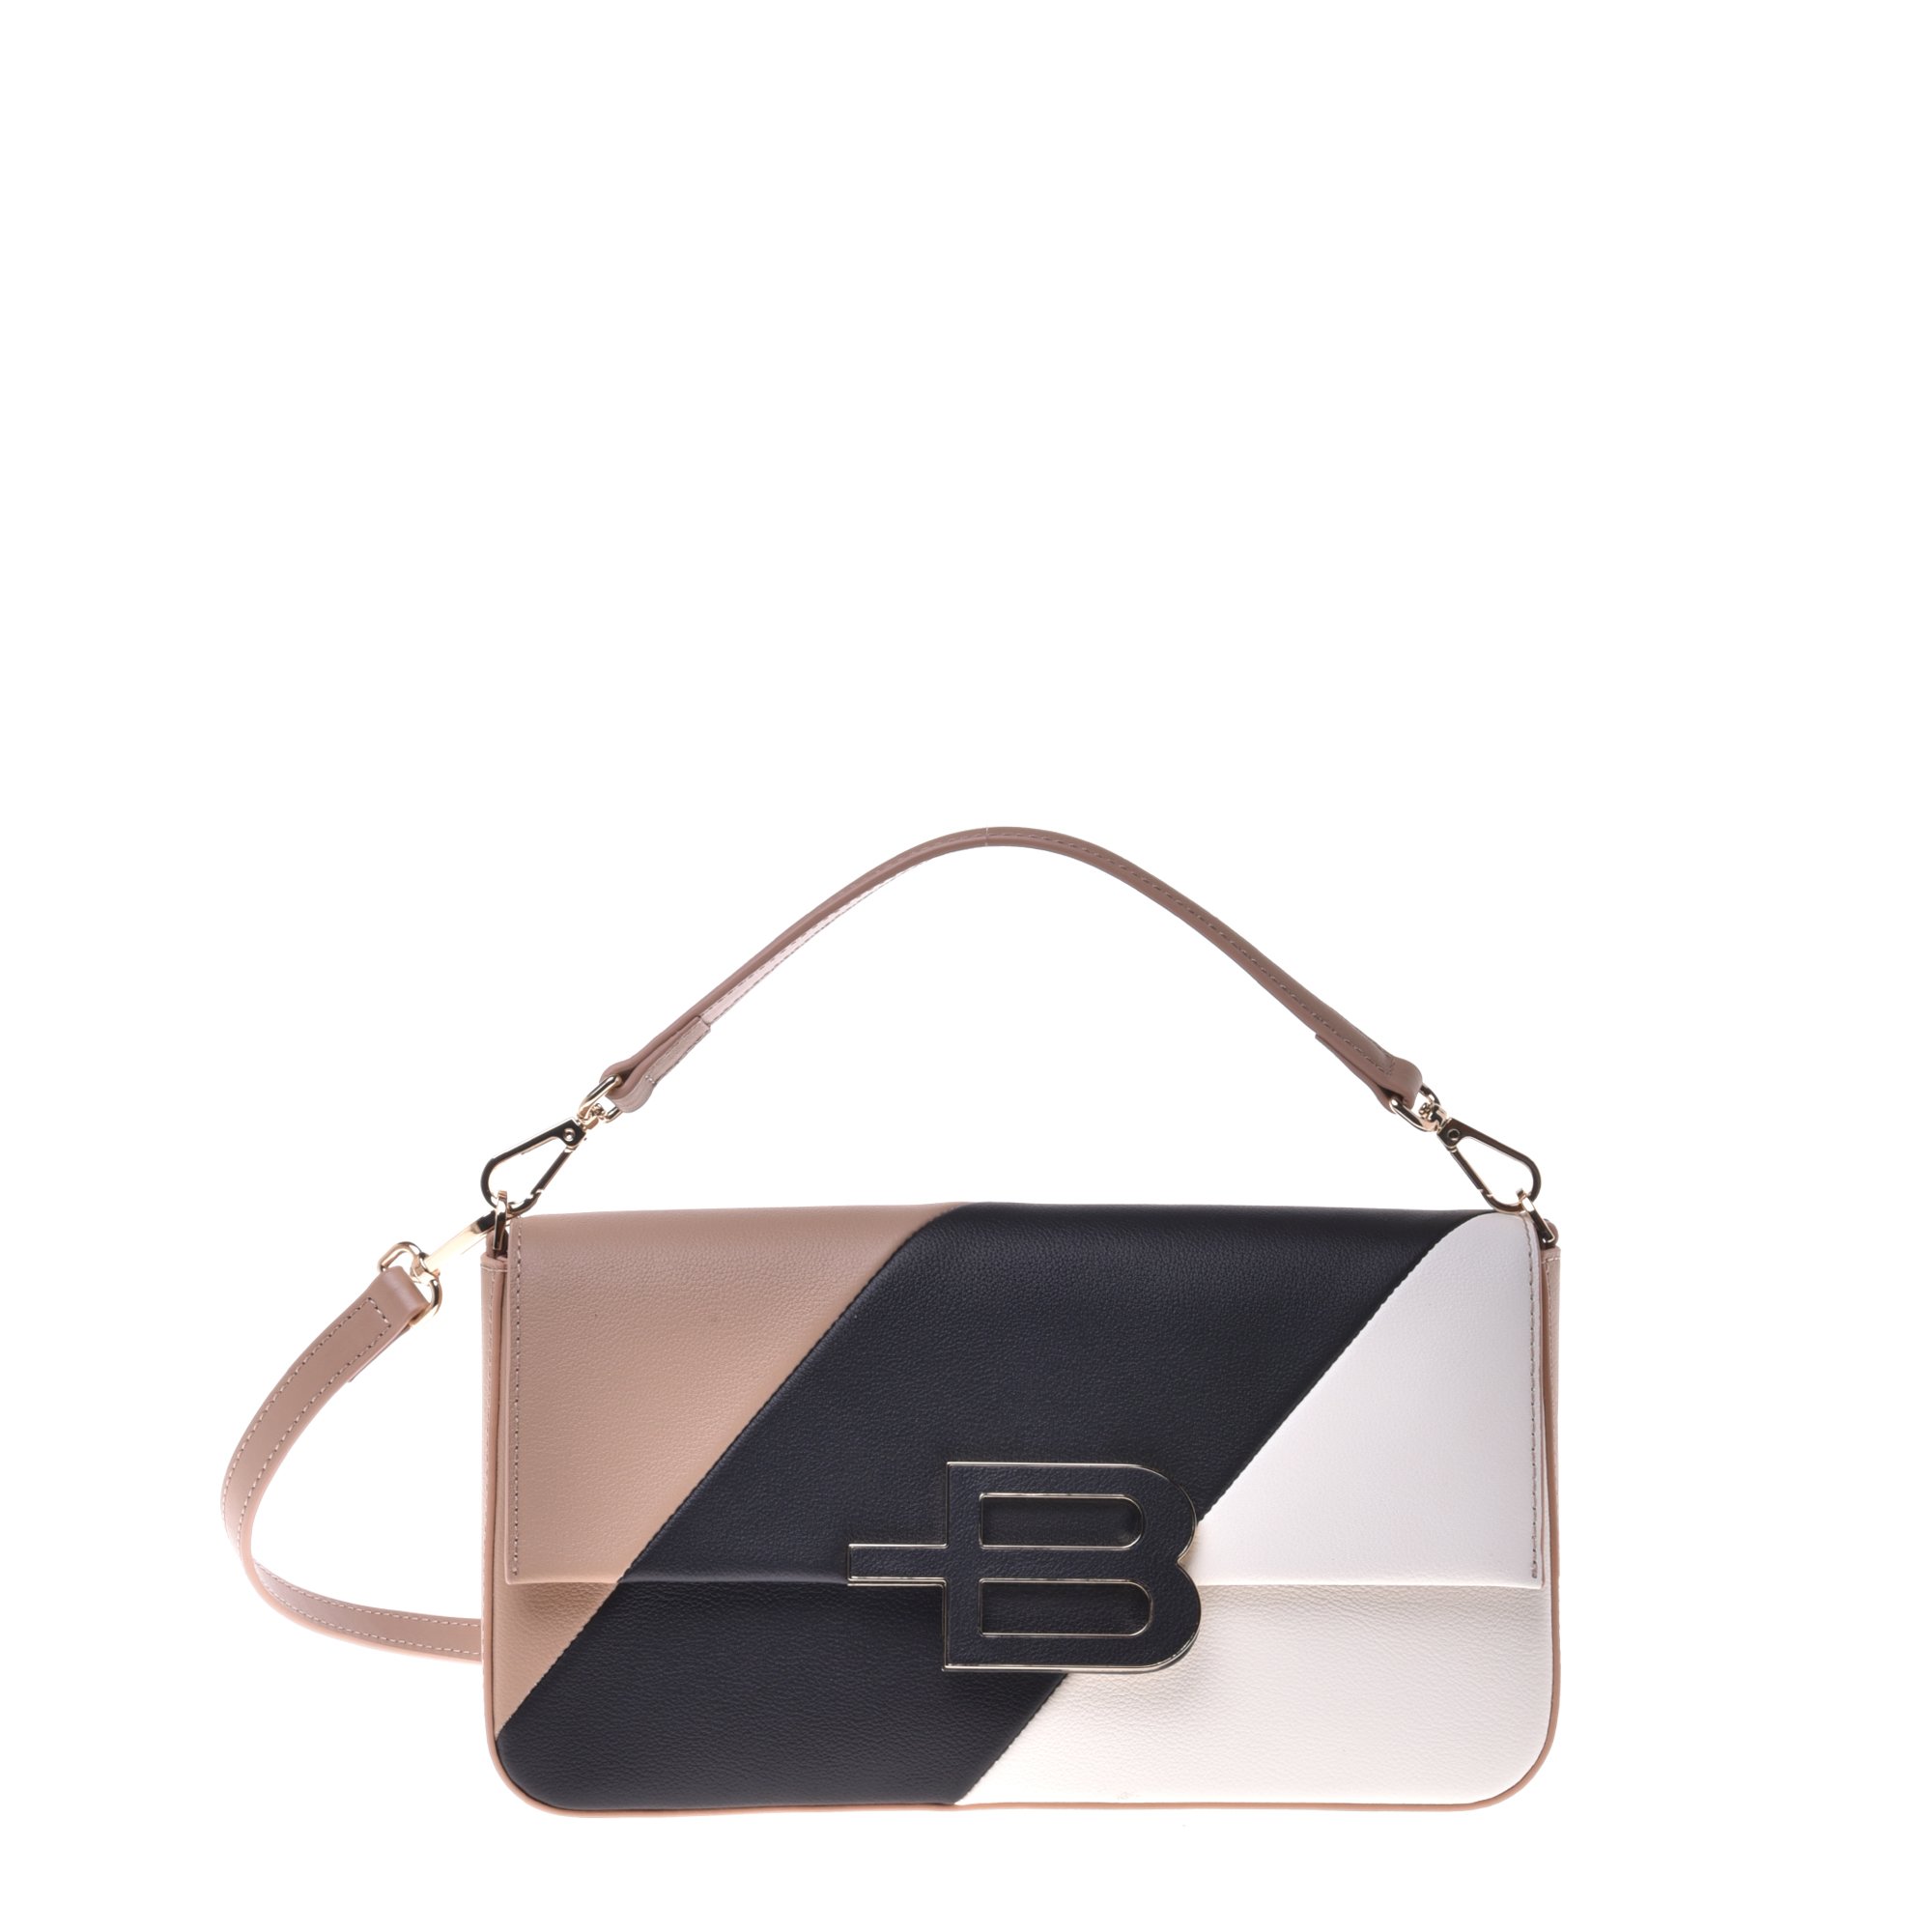 Crossbody bag in black, nude and white calfskin image